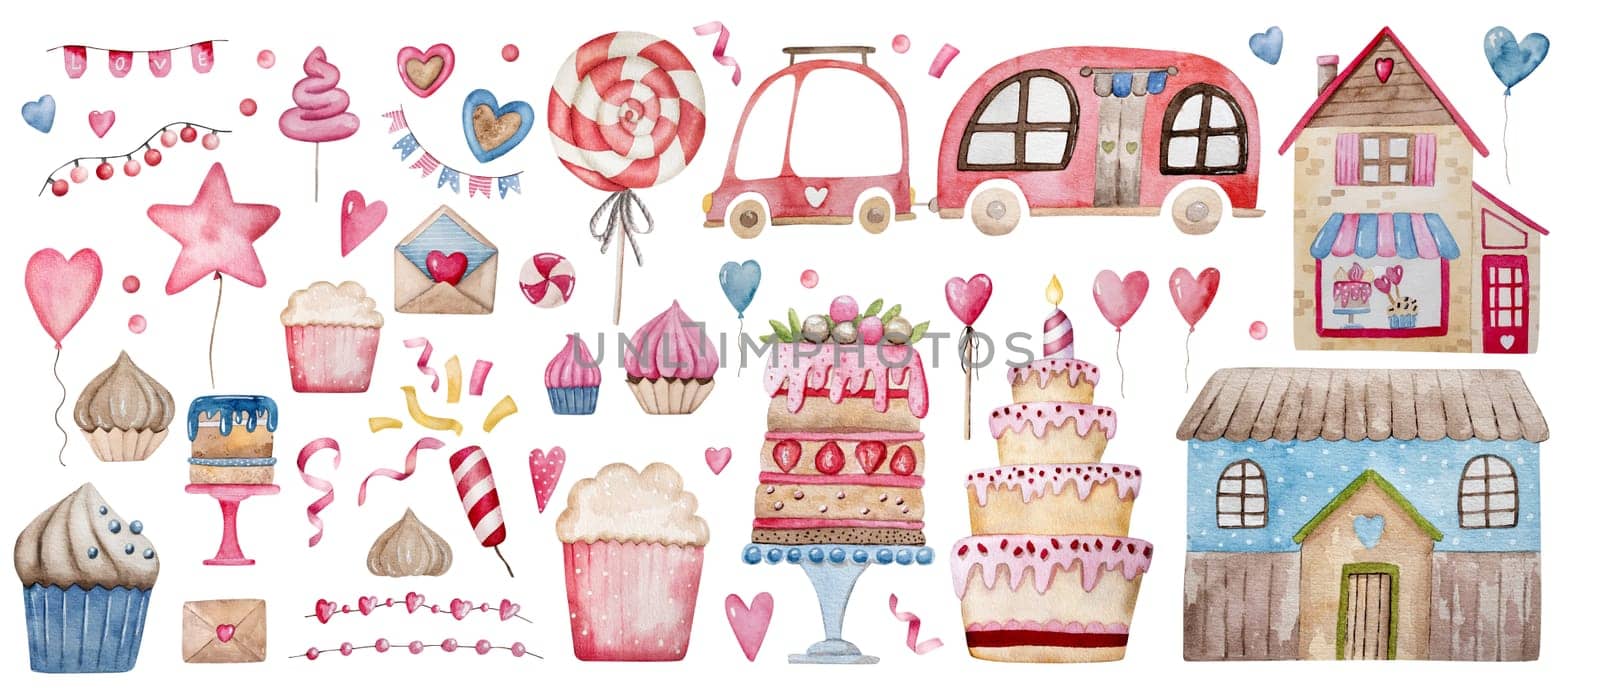 Valentine'S Day Clipart Set: Gifts, Hearts, Sweets, Etc by tan4ikk1